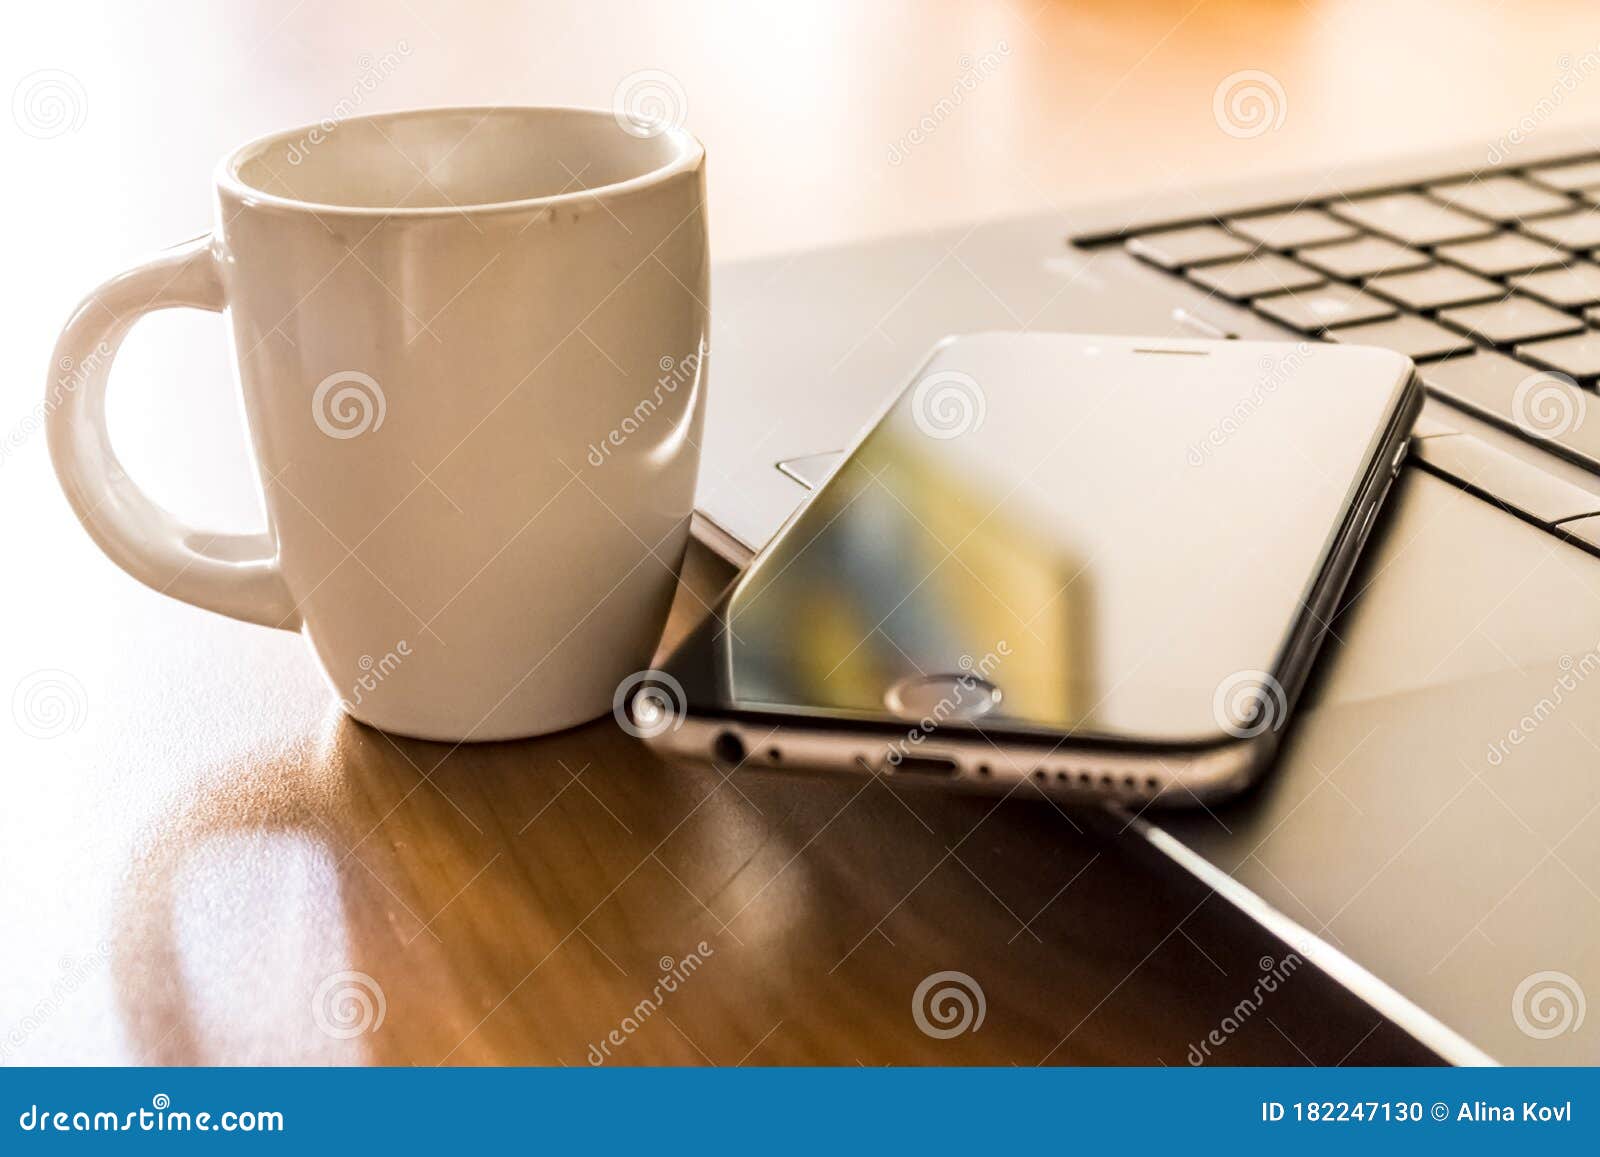 smartphone and laptop with a coffee cup, working remotely during coronavirus, smartwork with pc and cell phone concept